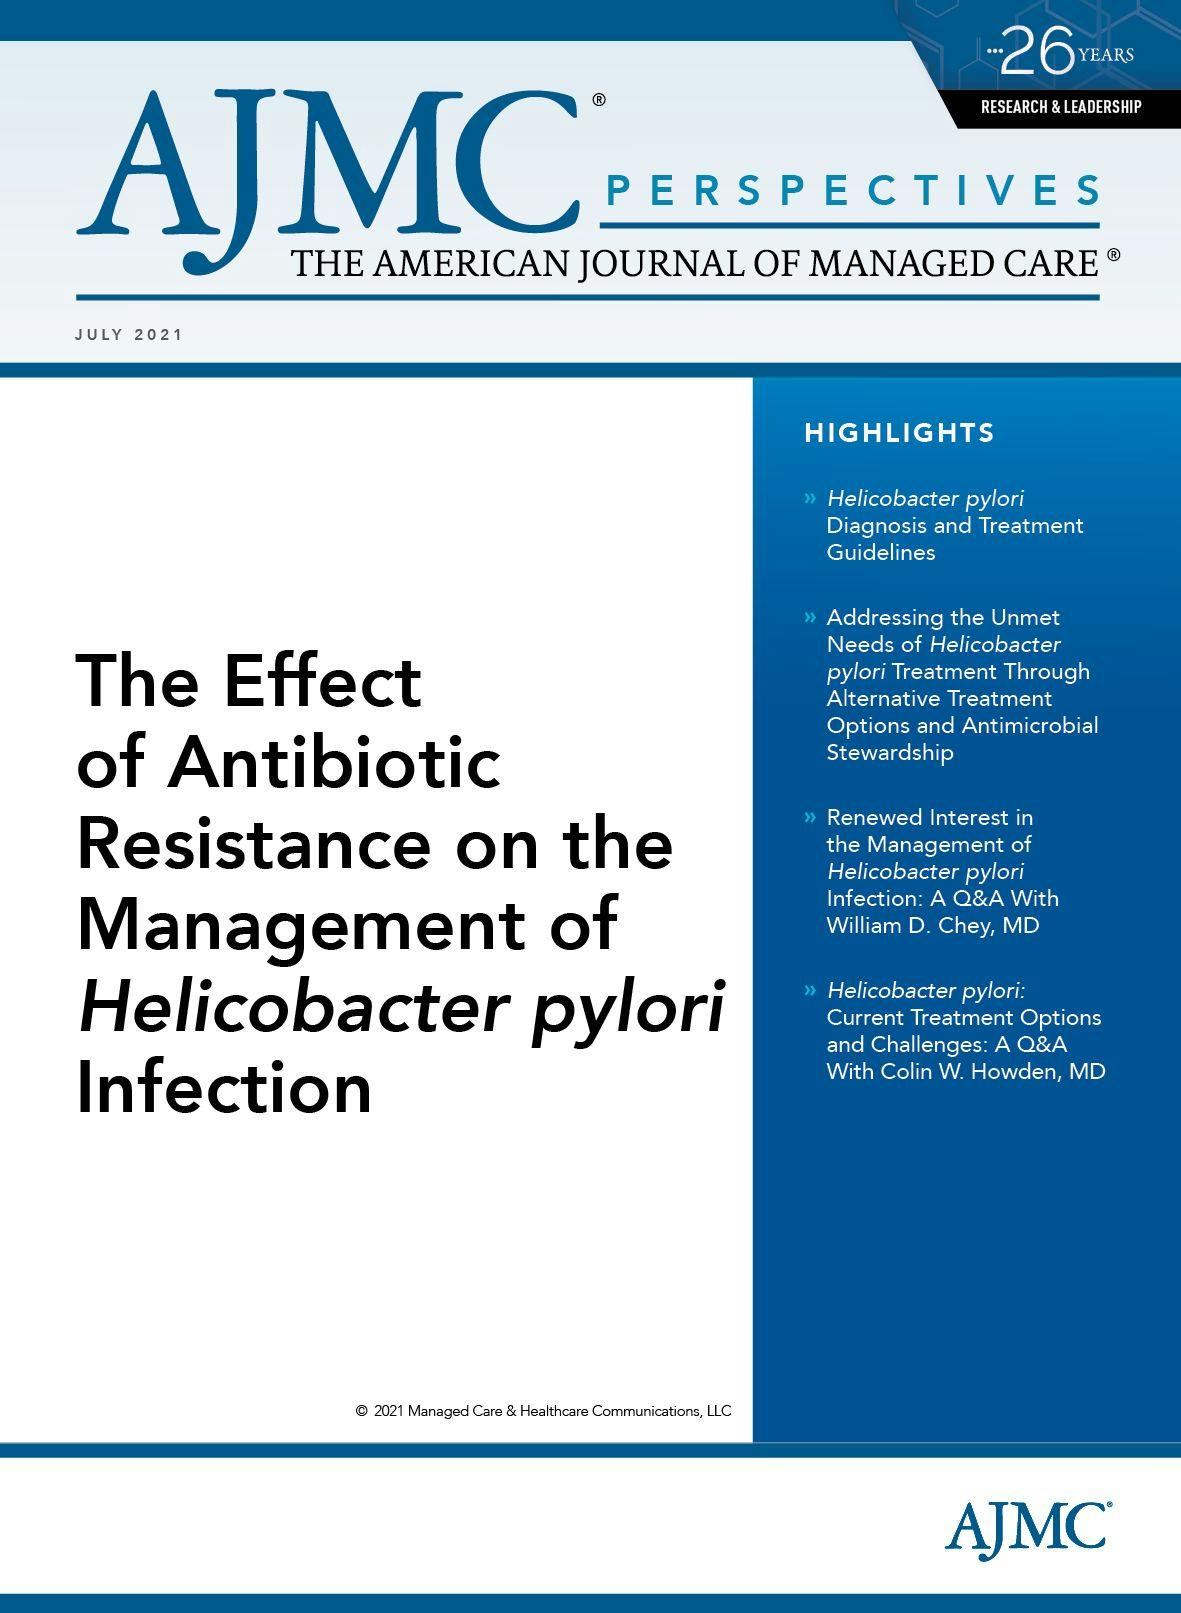 The Effect of Antibiotic Resistance on the Management of Helicobacter pylori Infection